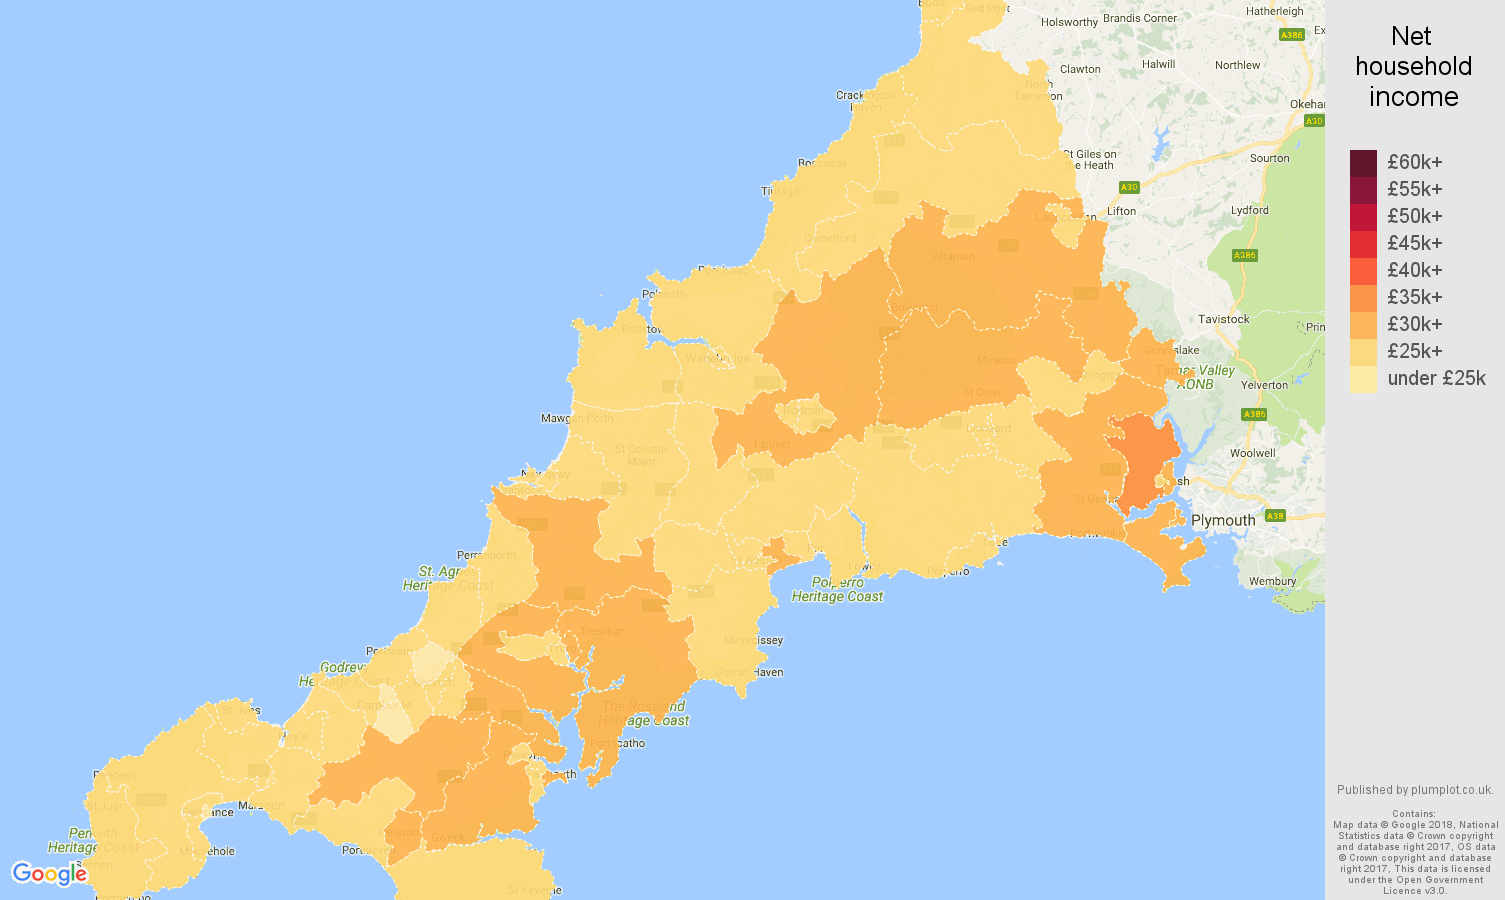 Cornwall net household income map